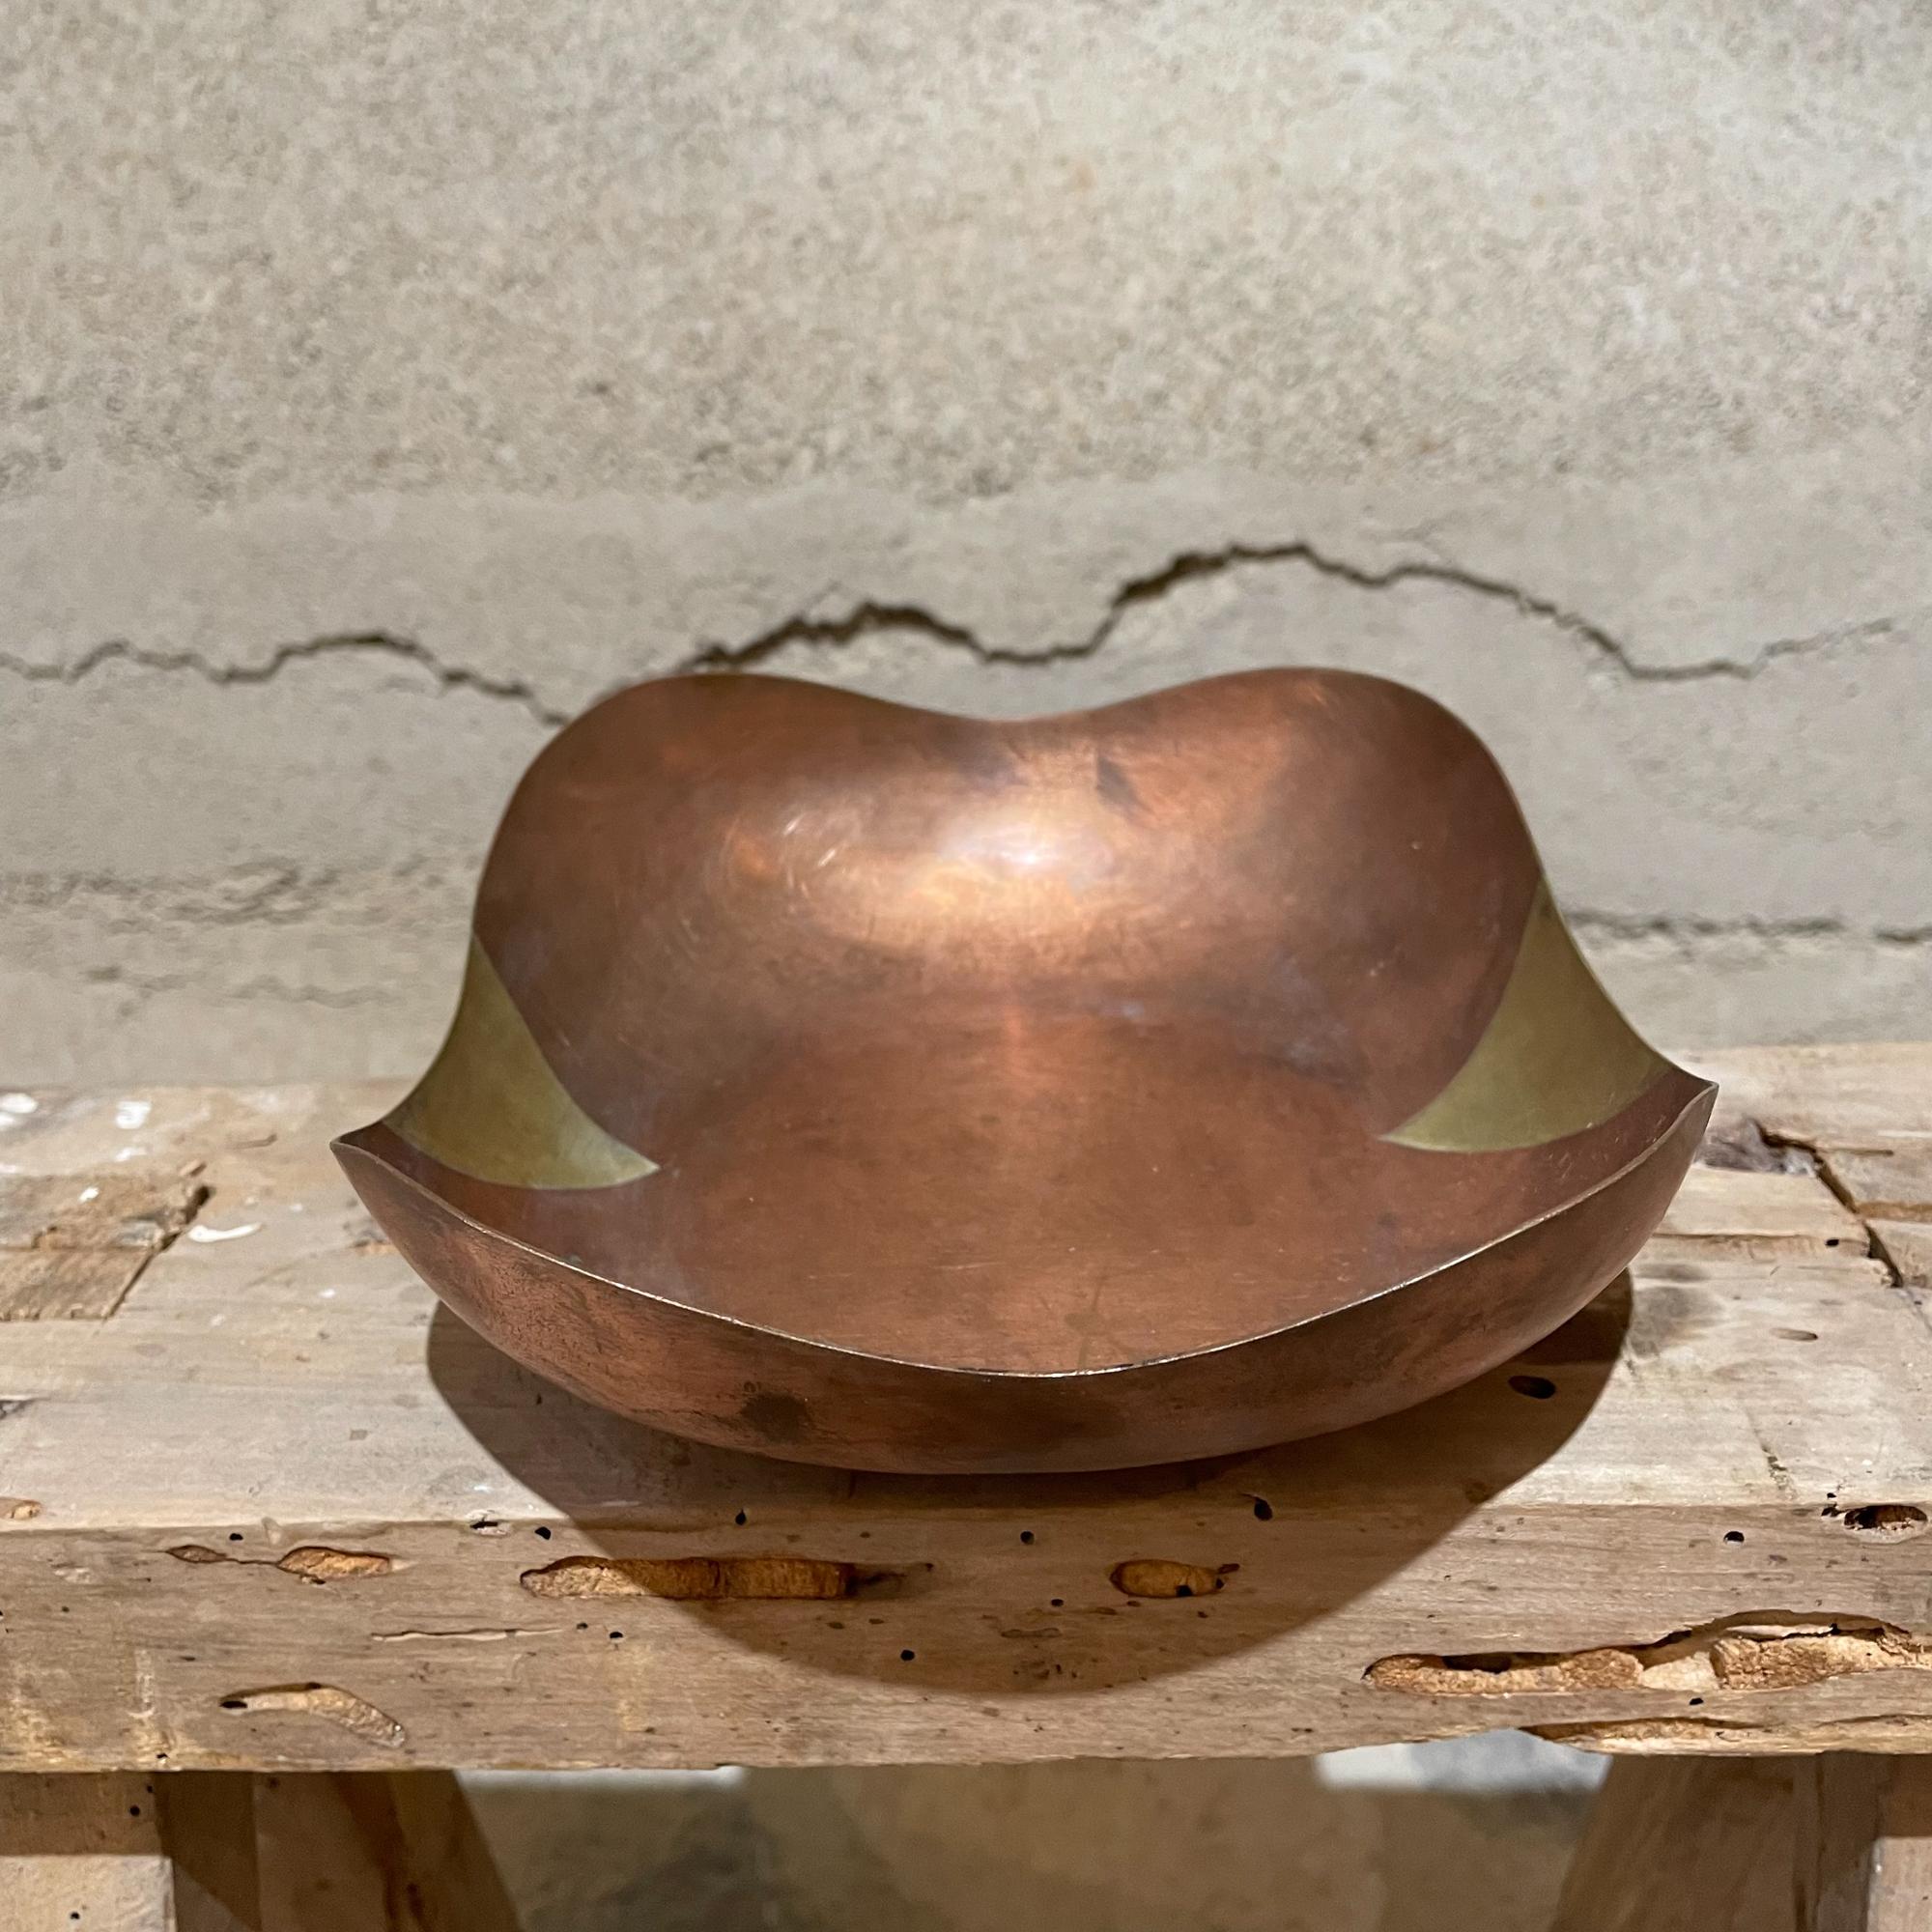 1960s Sculptural serving dish married metals stamped made in Mexico 
attributed to Los Castillo 
Brass and copper. 
Square shape subtle scalloped corners. 
6 width x 7 depth x 2.25 tall
Original vintage unrestored with vintage patina. 
Refer to